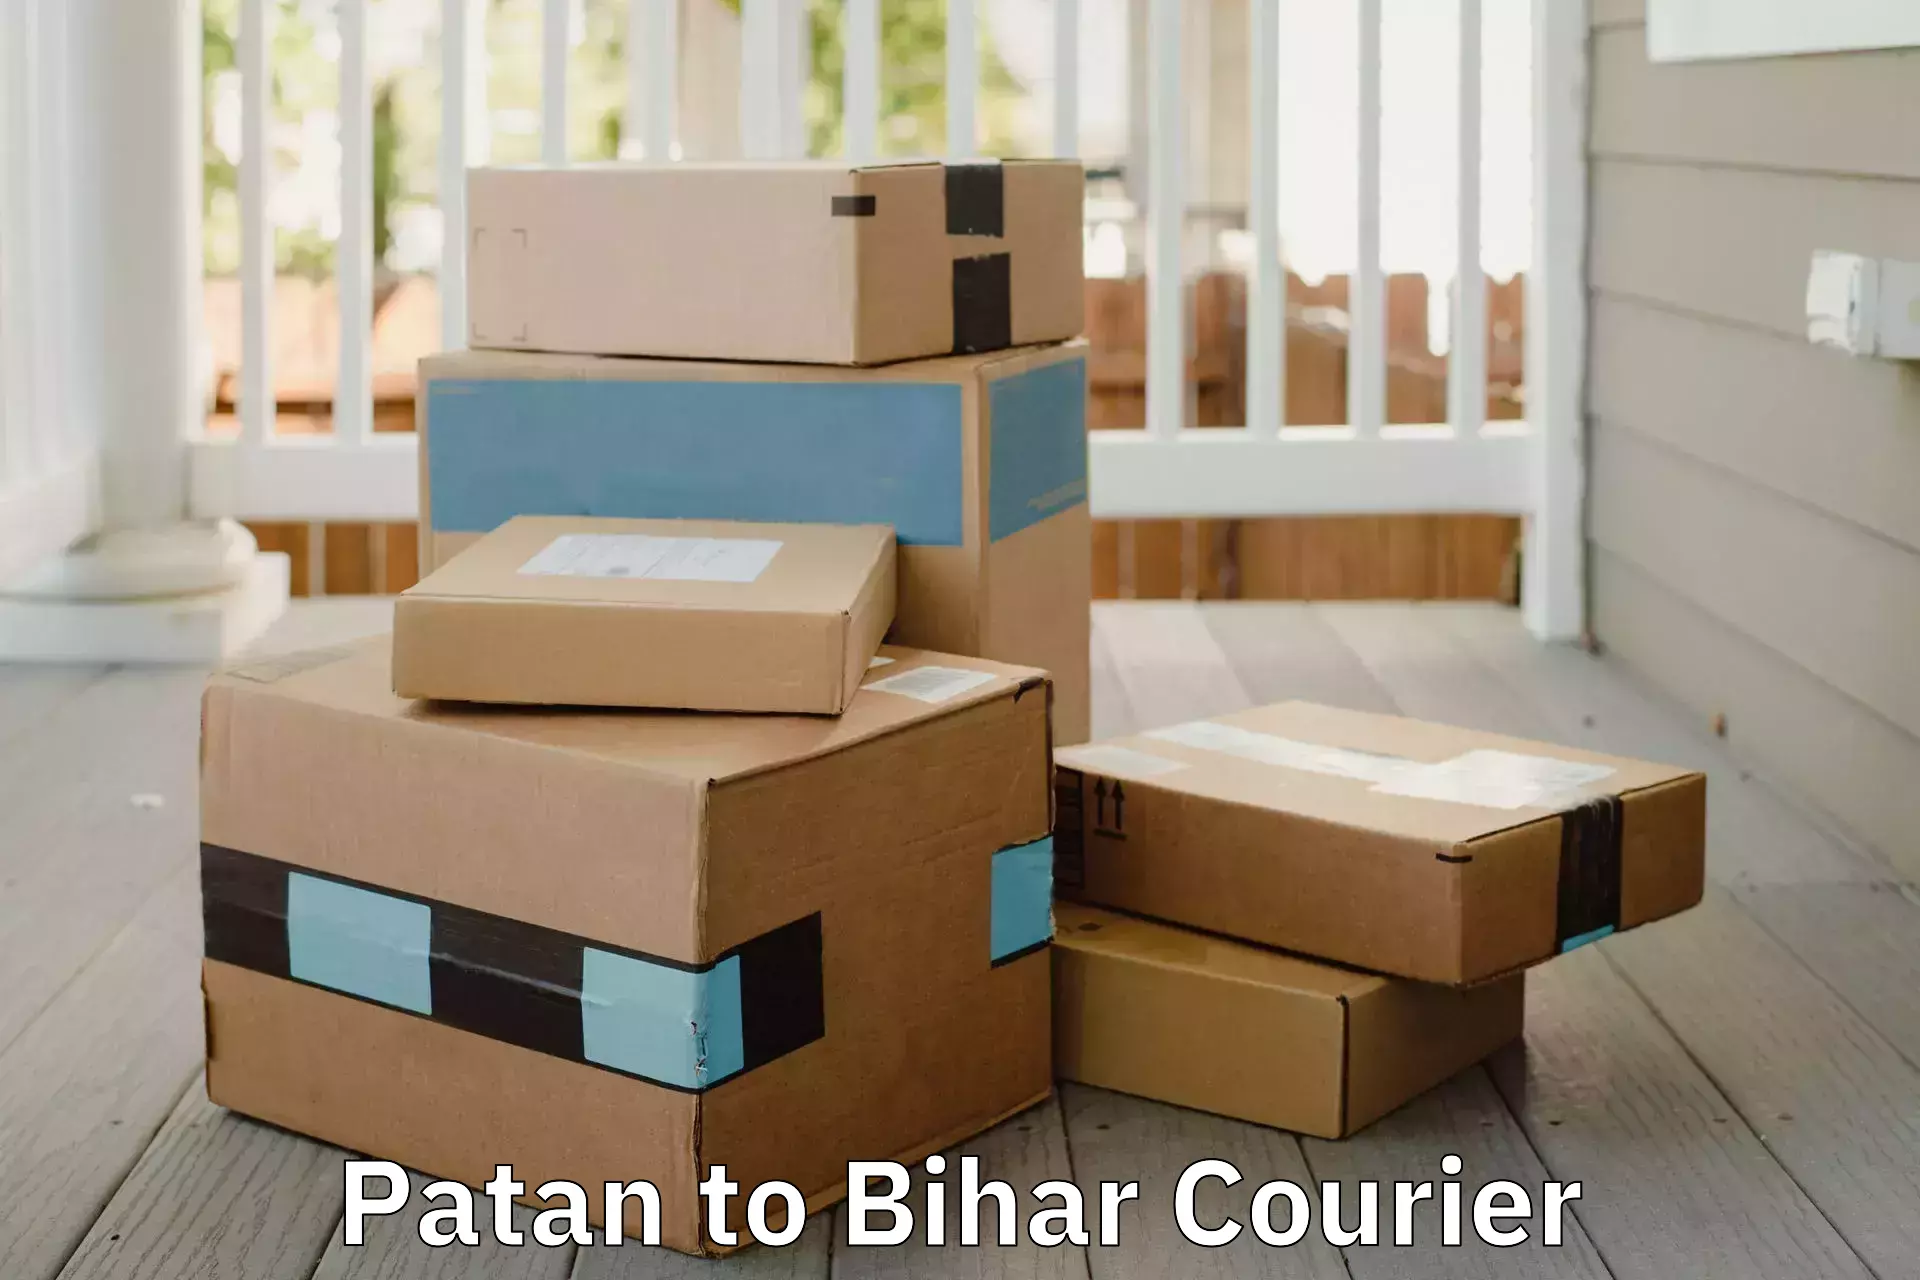 Furniture delivery service Patan to Bihar